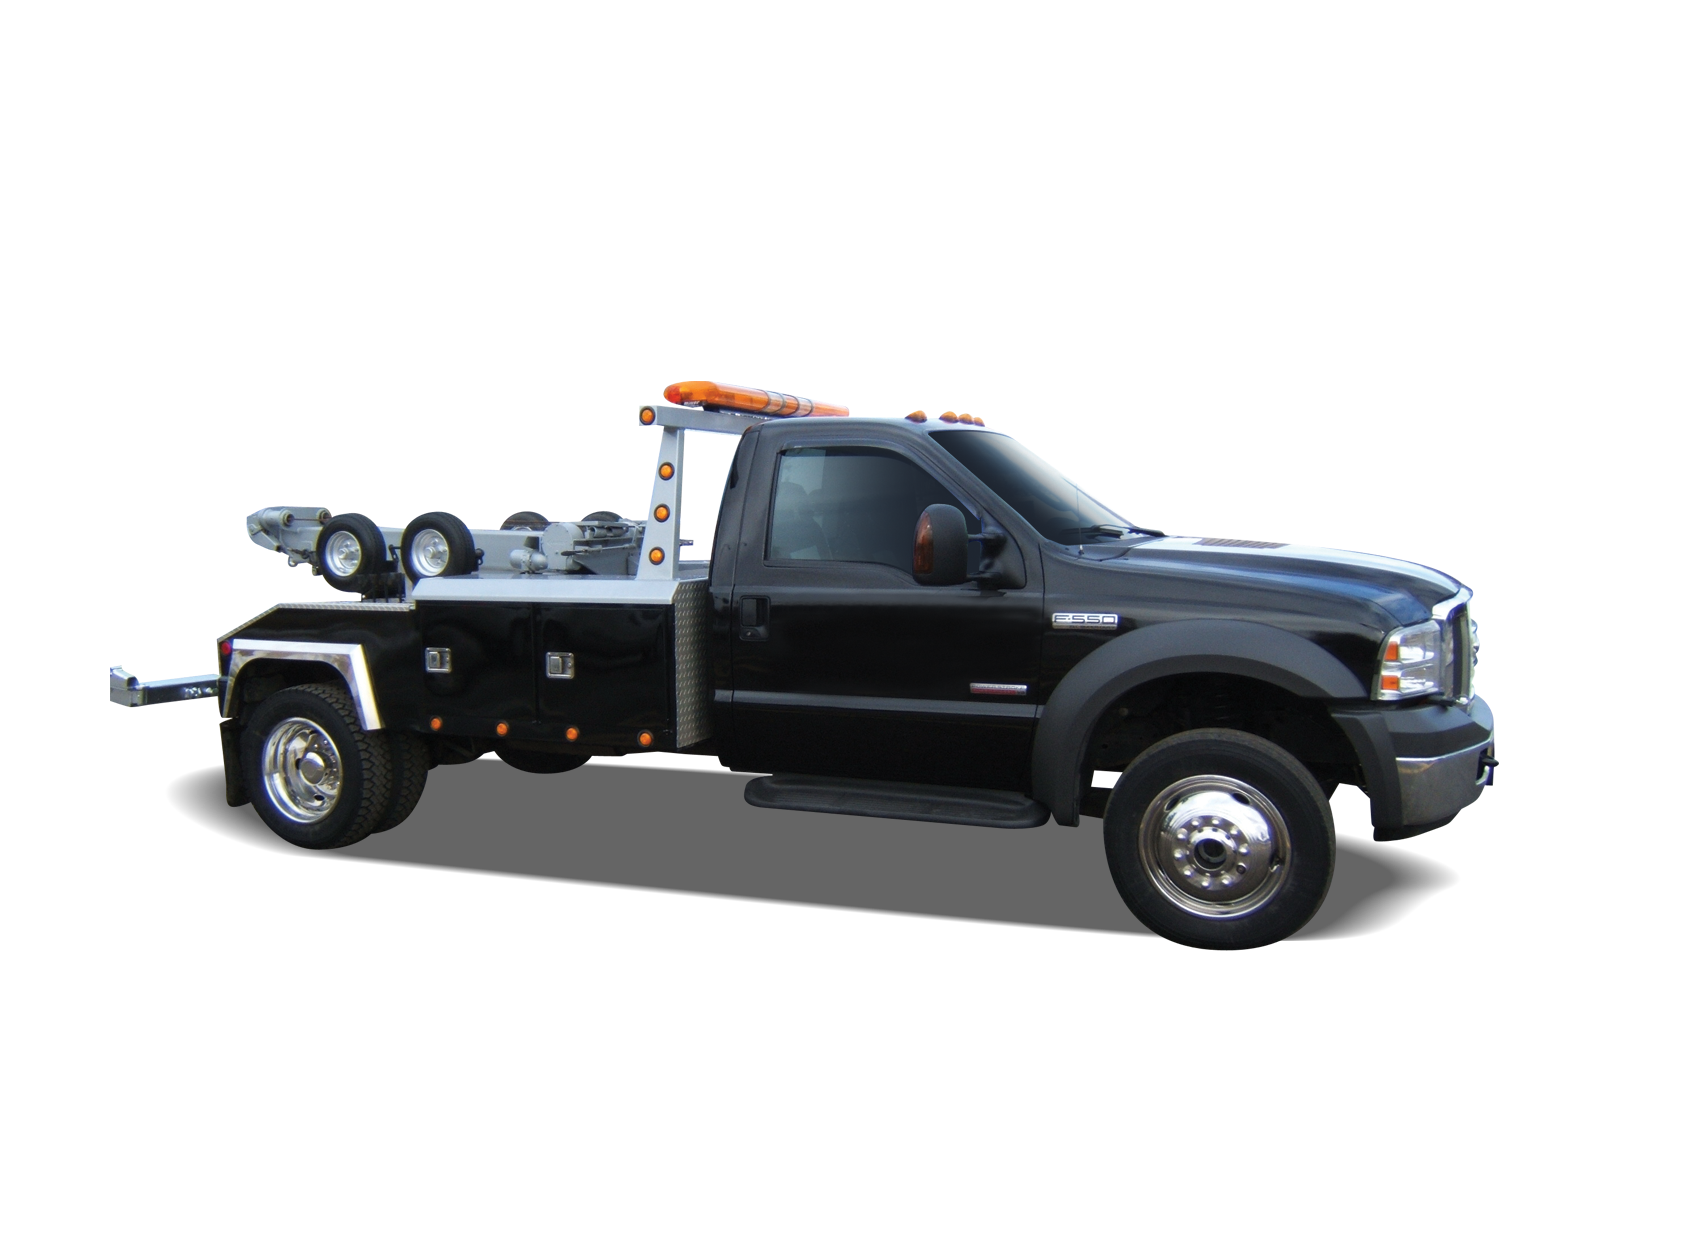 Towing Archives - NYC Towing Services